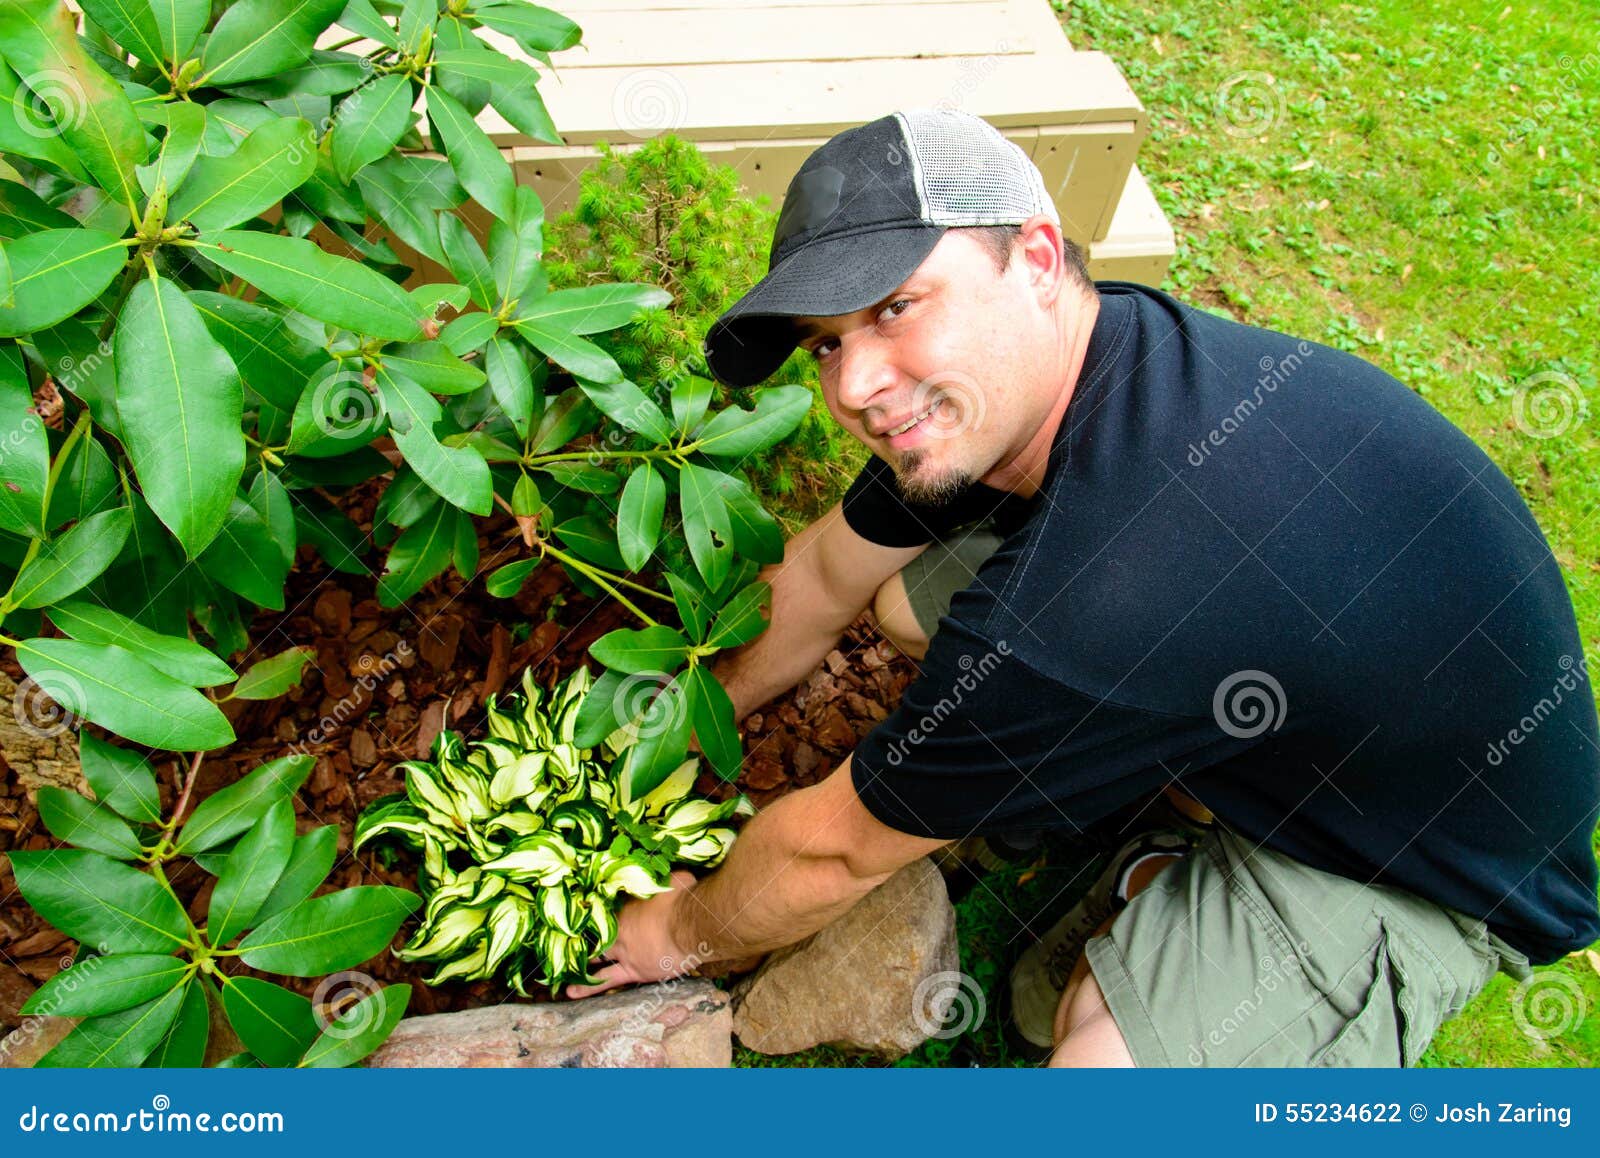 smiling man planting and landscaping